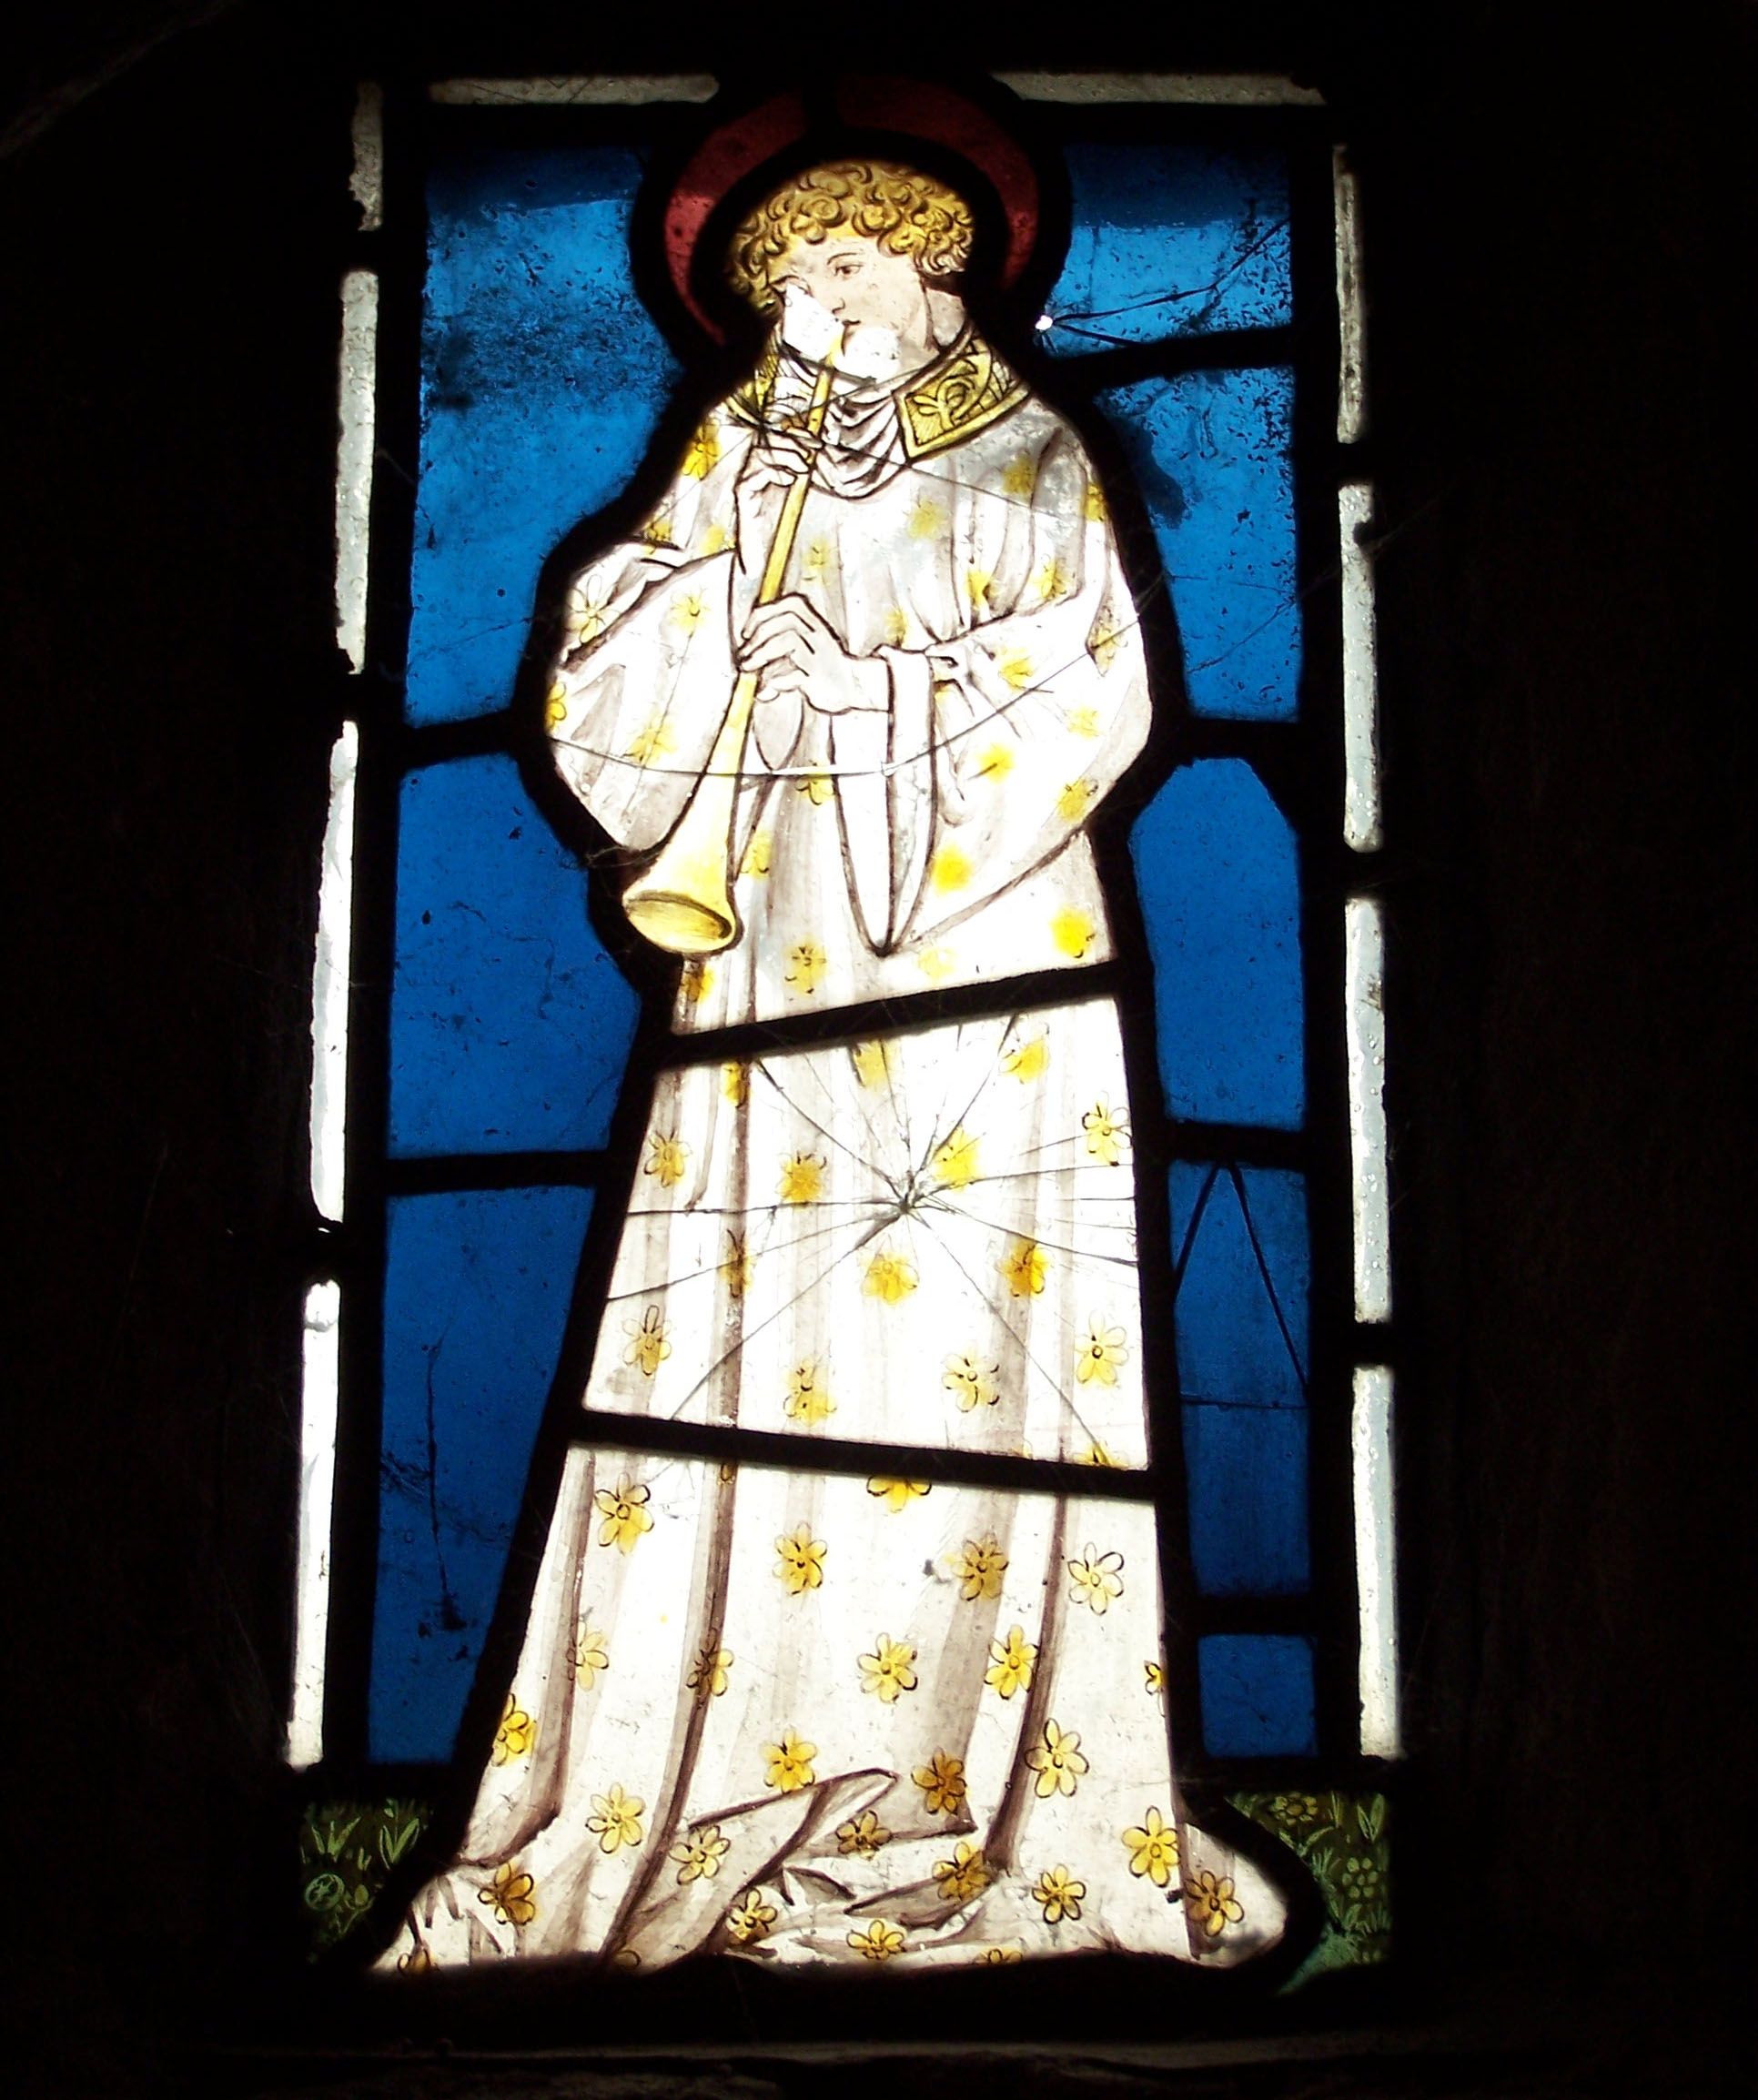 The Angel Window, over the side door in the chancel, may be the only surviving medieval stained glass window in the church.